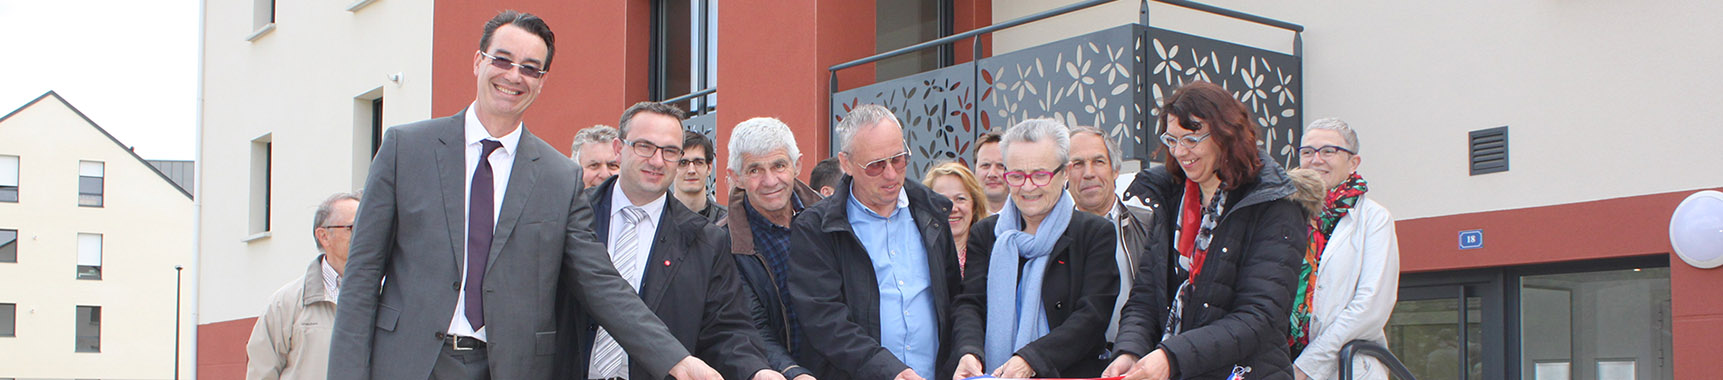 Inauguration Châteaugiron